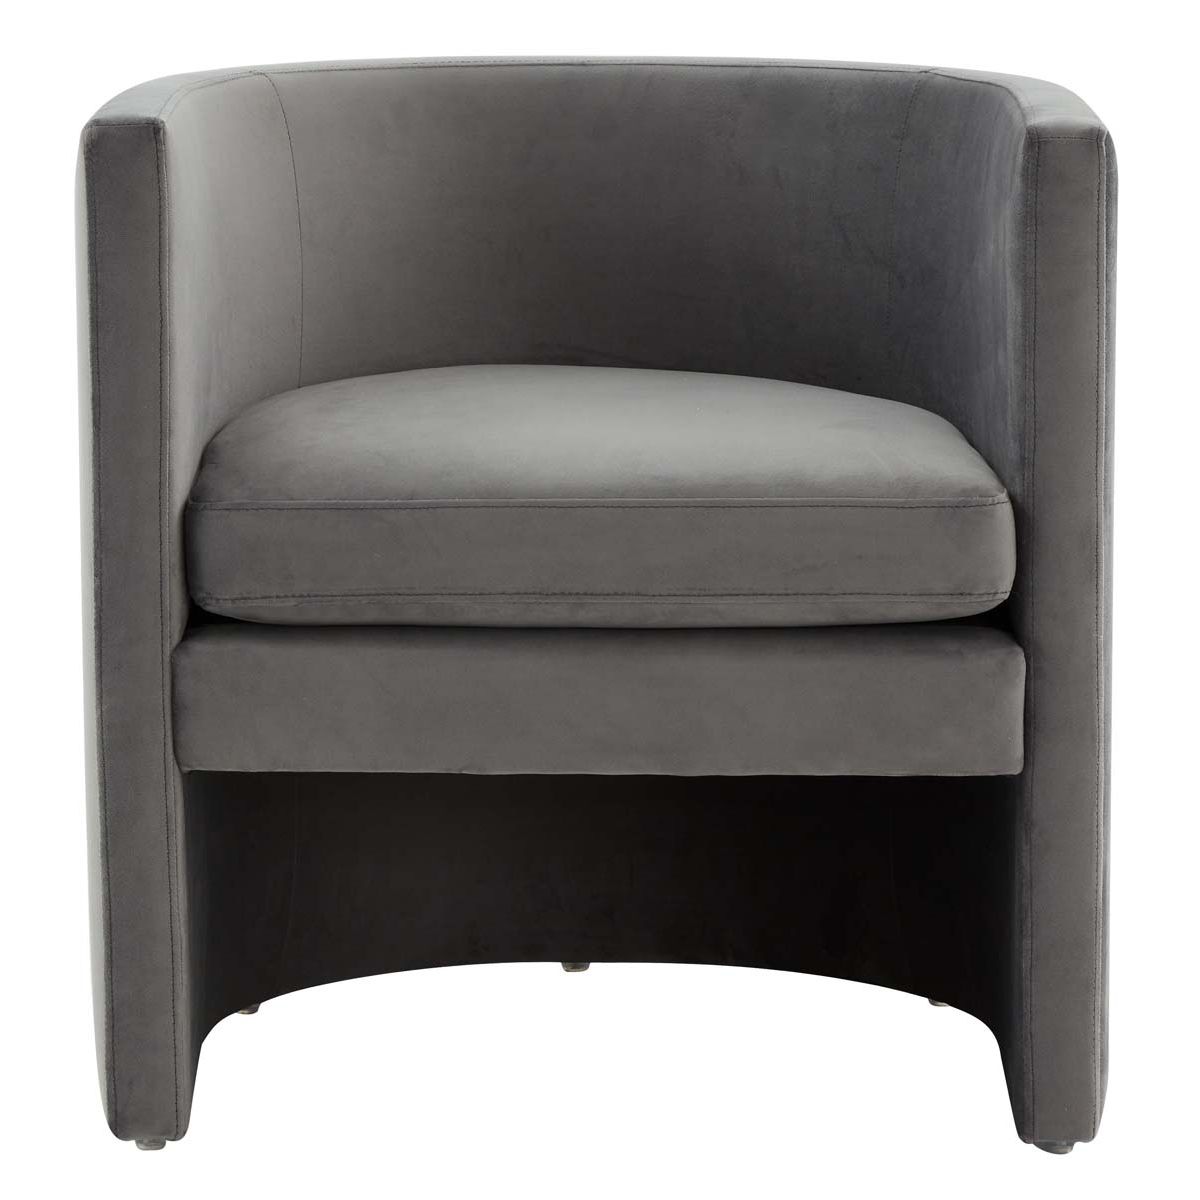 Safavieh Couture Rosabeth Curved Accent Chair - Slate Grey